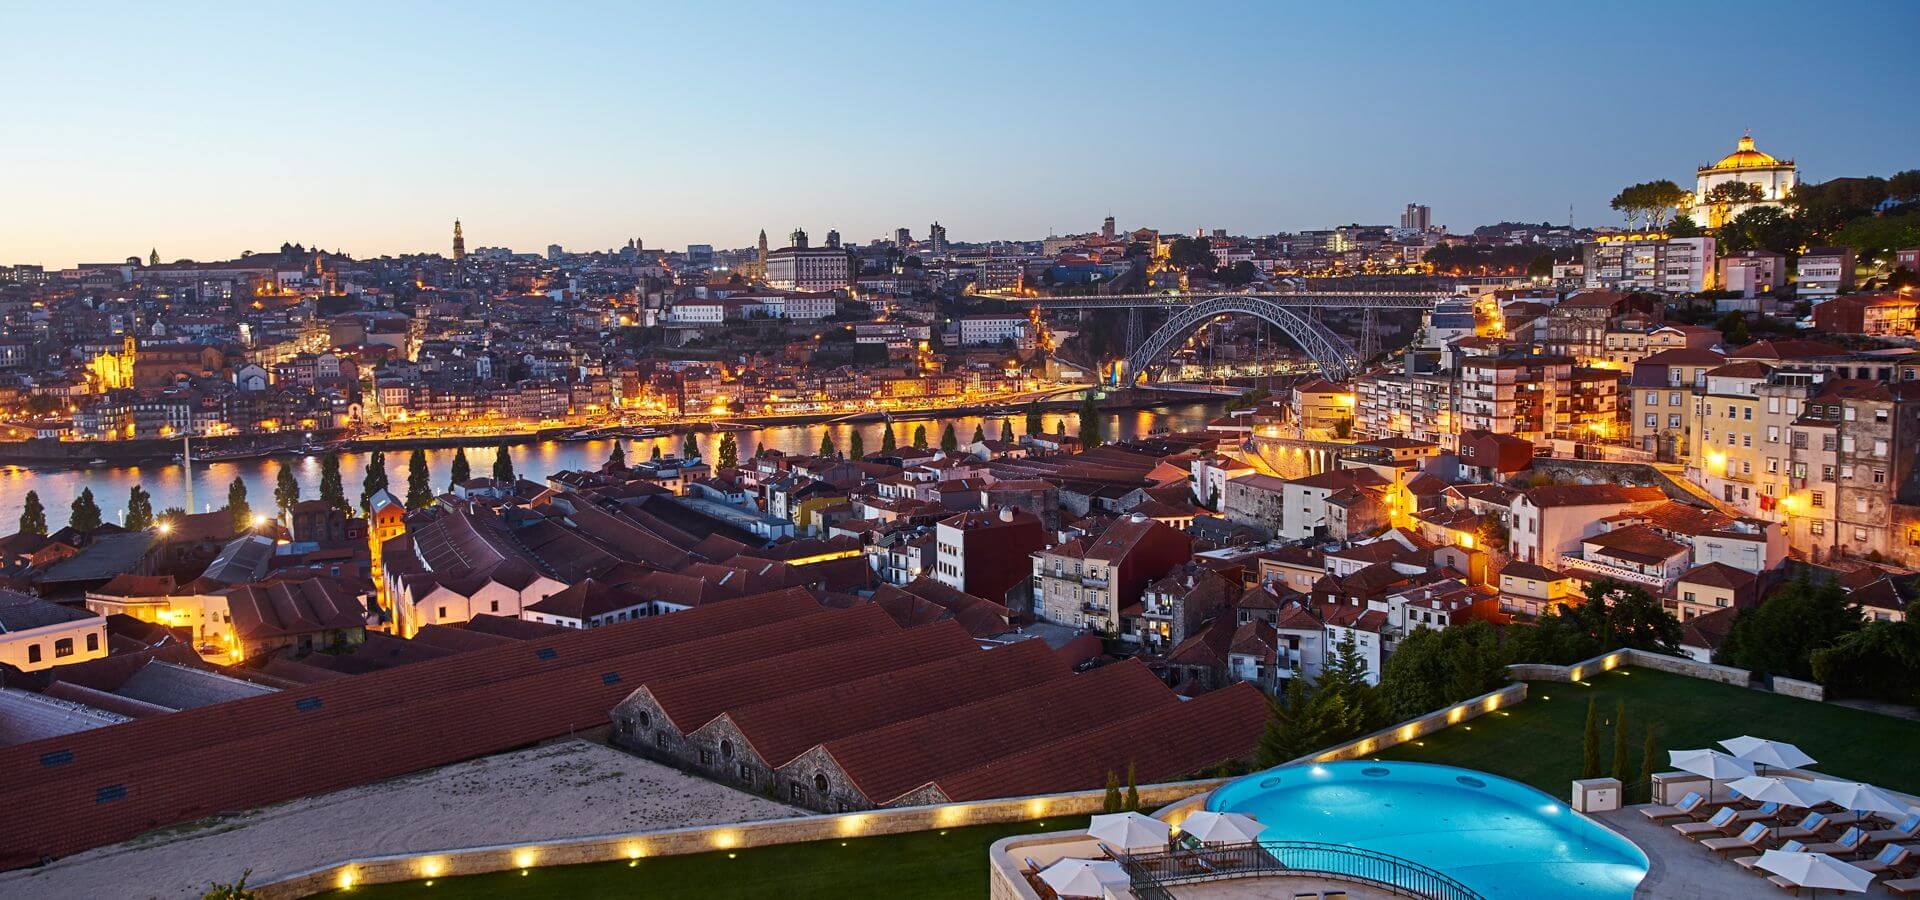 View of Porto, Portugal from The Yeatman